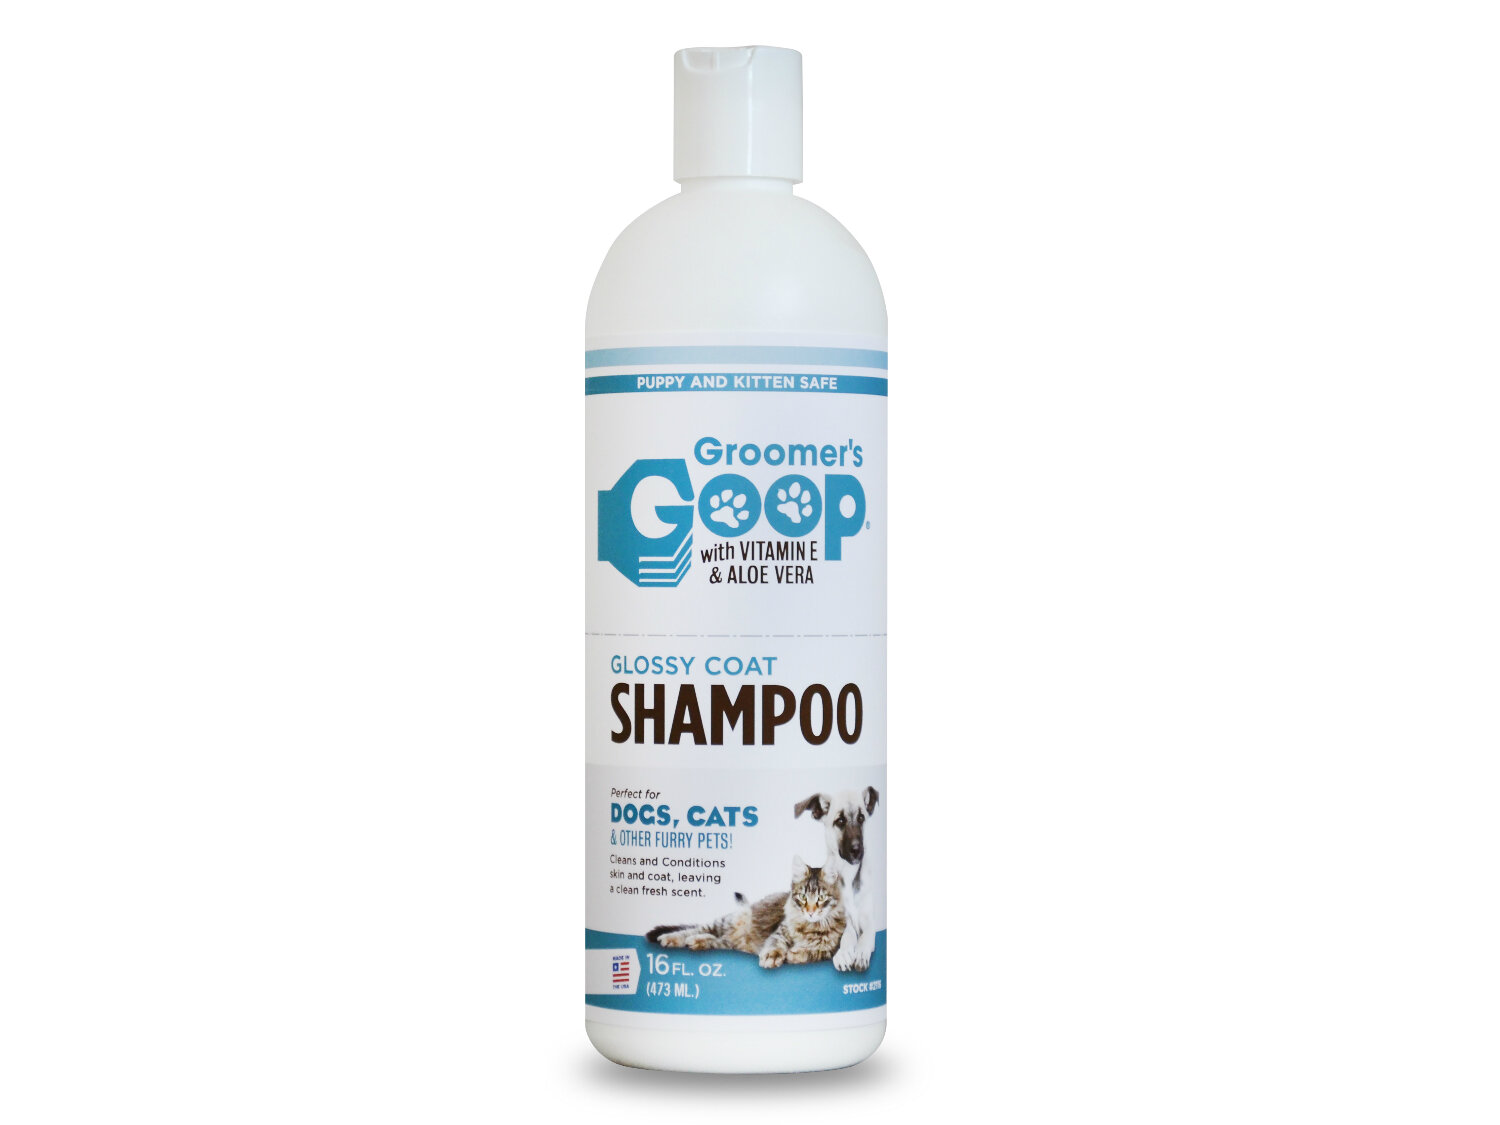 Groomer's Goop Glossy Pet Shampoo - 16 oz. Bottle #216 — Hand Cleaner and Stain Removers, All Goop Cleaners